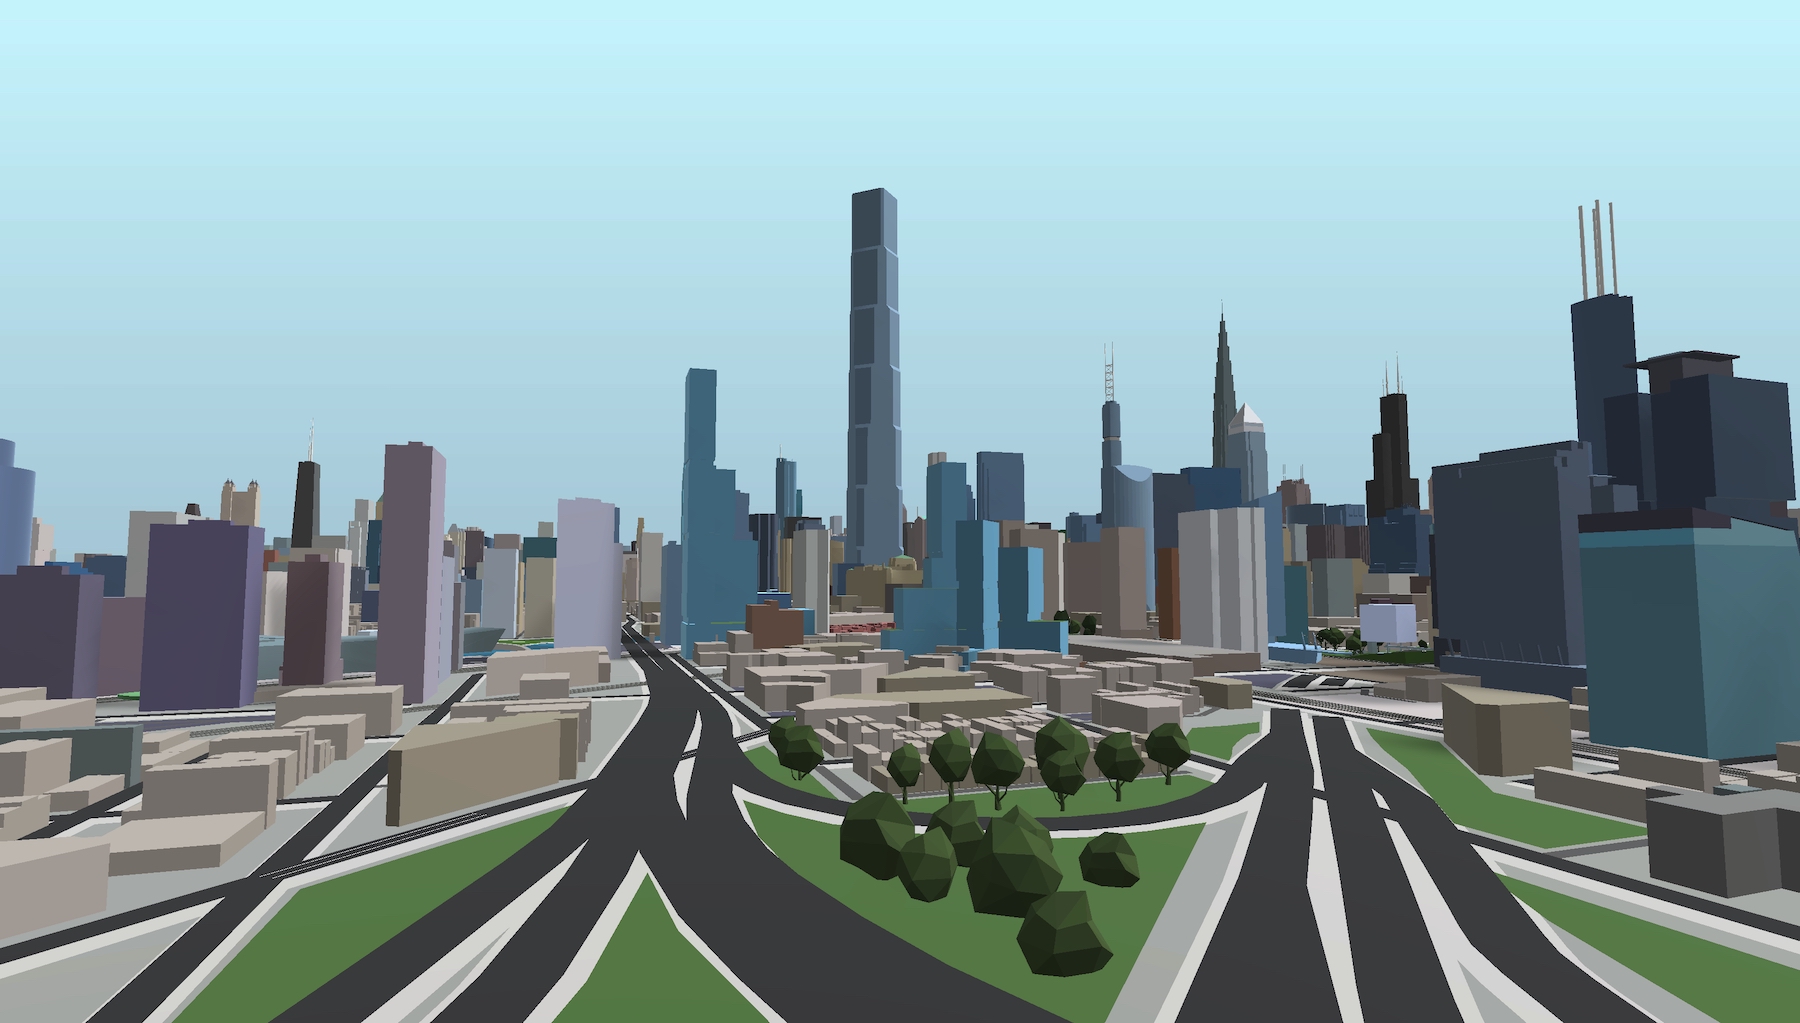 Chicago World Trade Center Iteration #3 in 2030